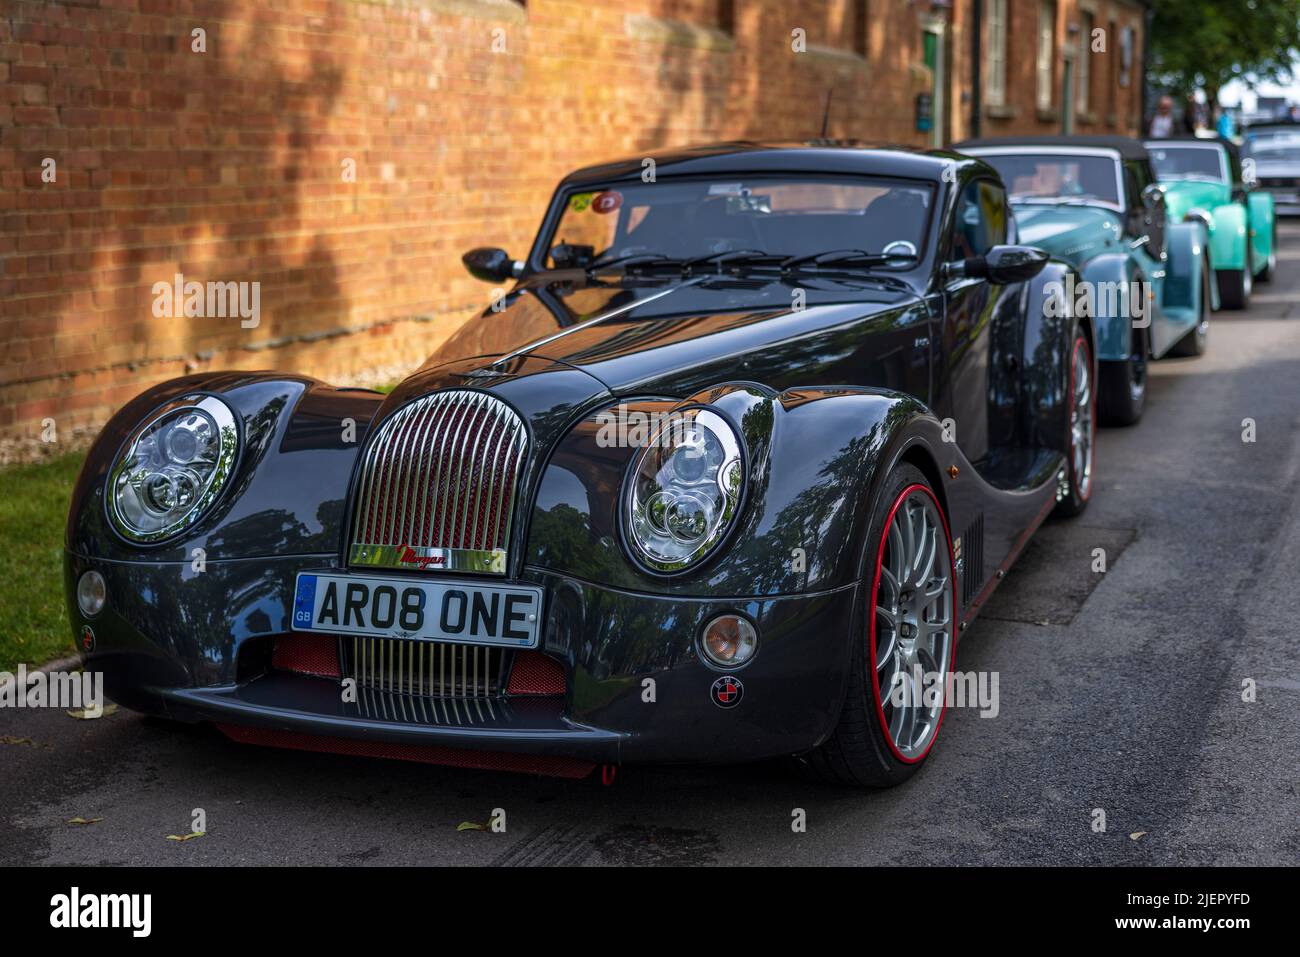 2014 Morgan Aero 8 ‘AR08 ONE’ on display at the Bicester Scramble on the 19th June 2022 Stock Photo